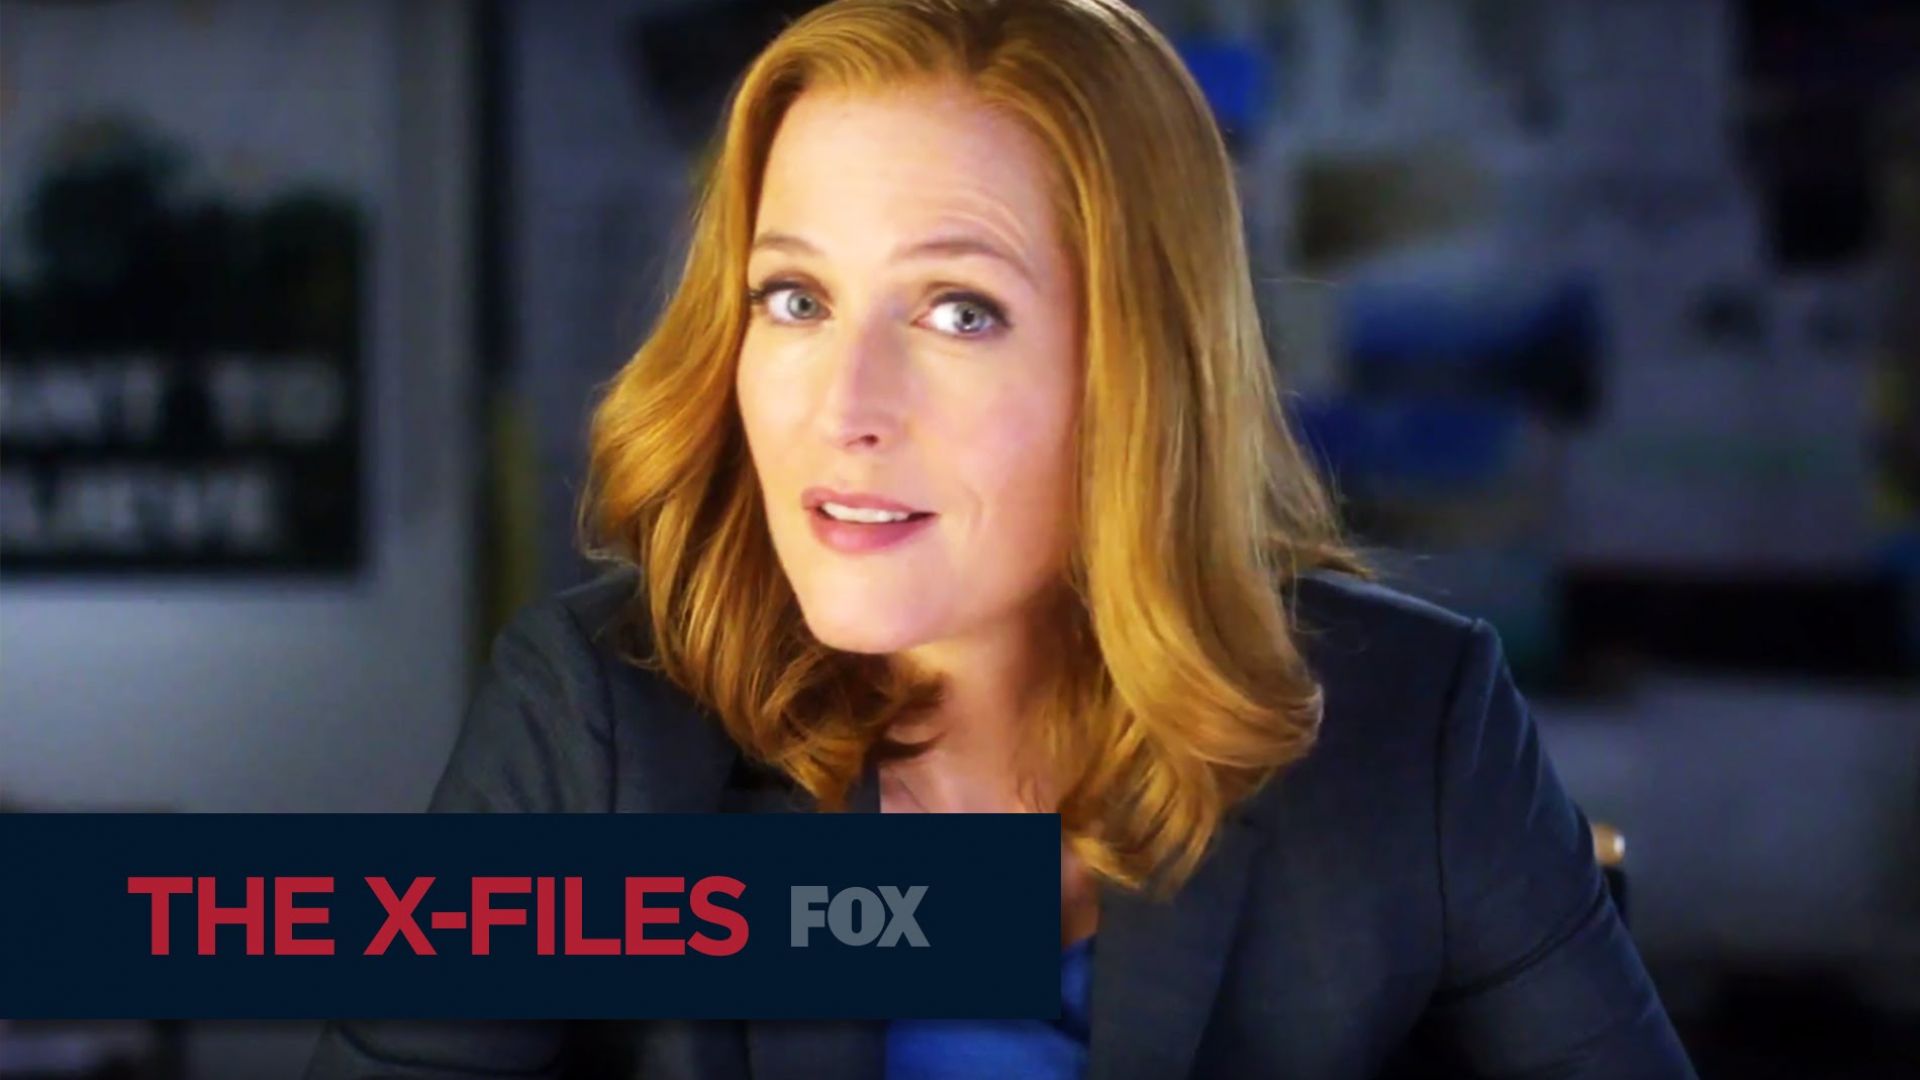 The X-Files Show &amp; Not Tell: Gillian Anderson